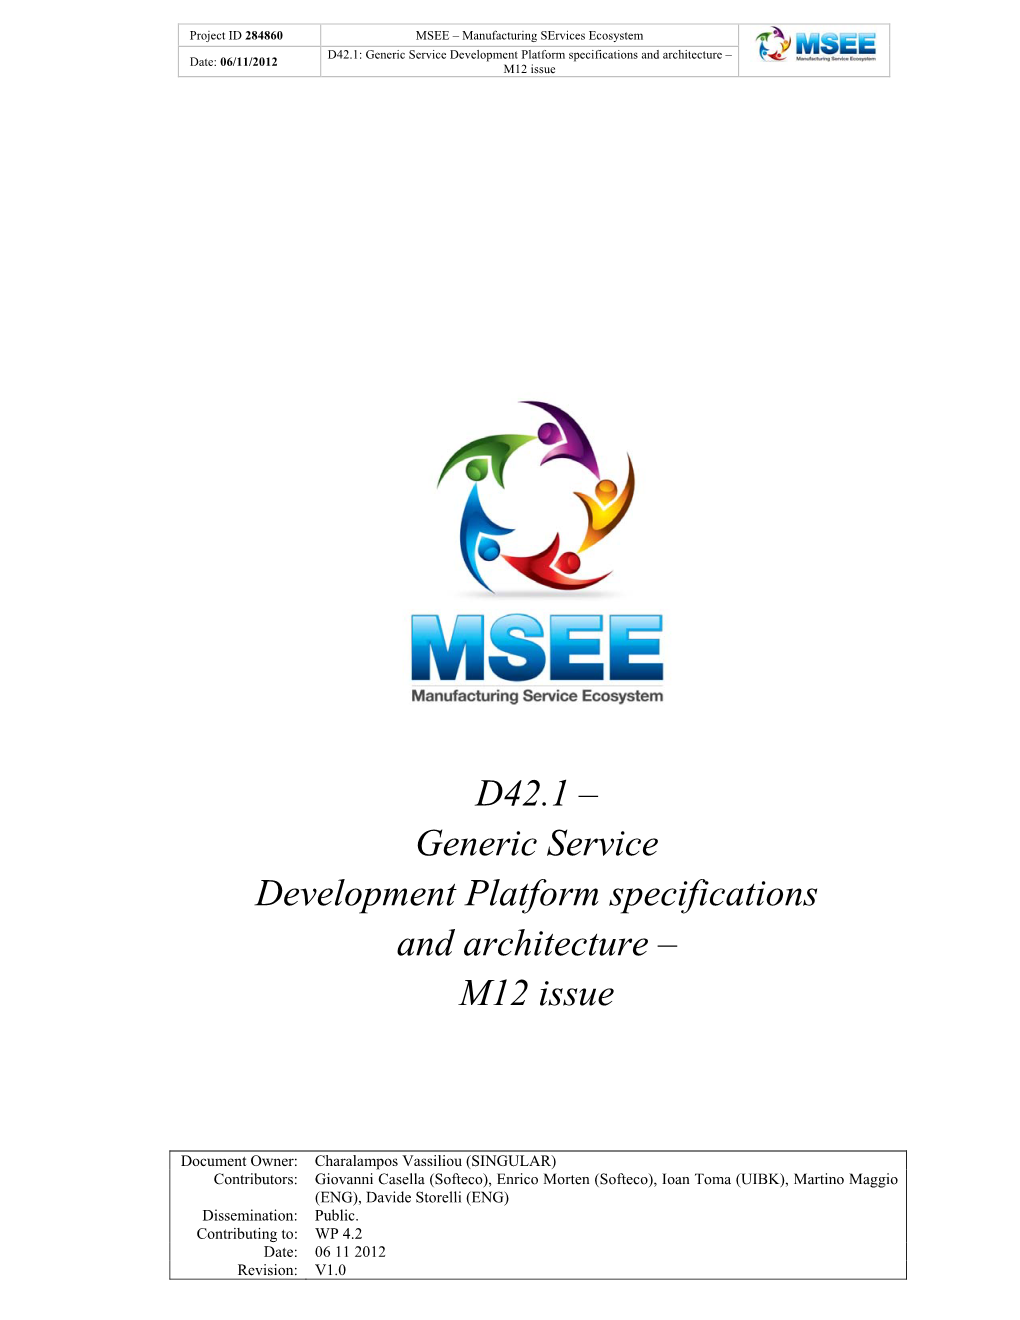 Generic Service Development Platform Specifications and Architecture – Date: 06/11/2012 M12 Issue